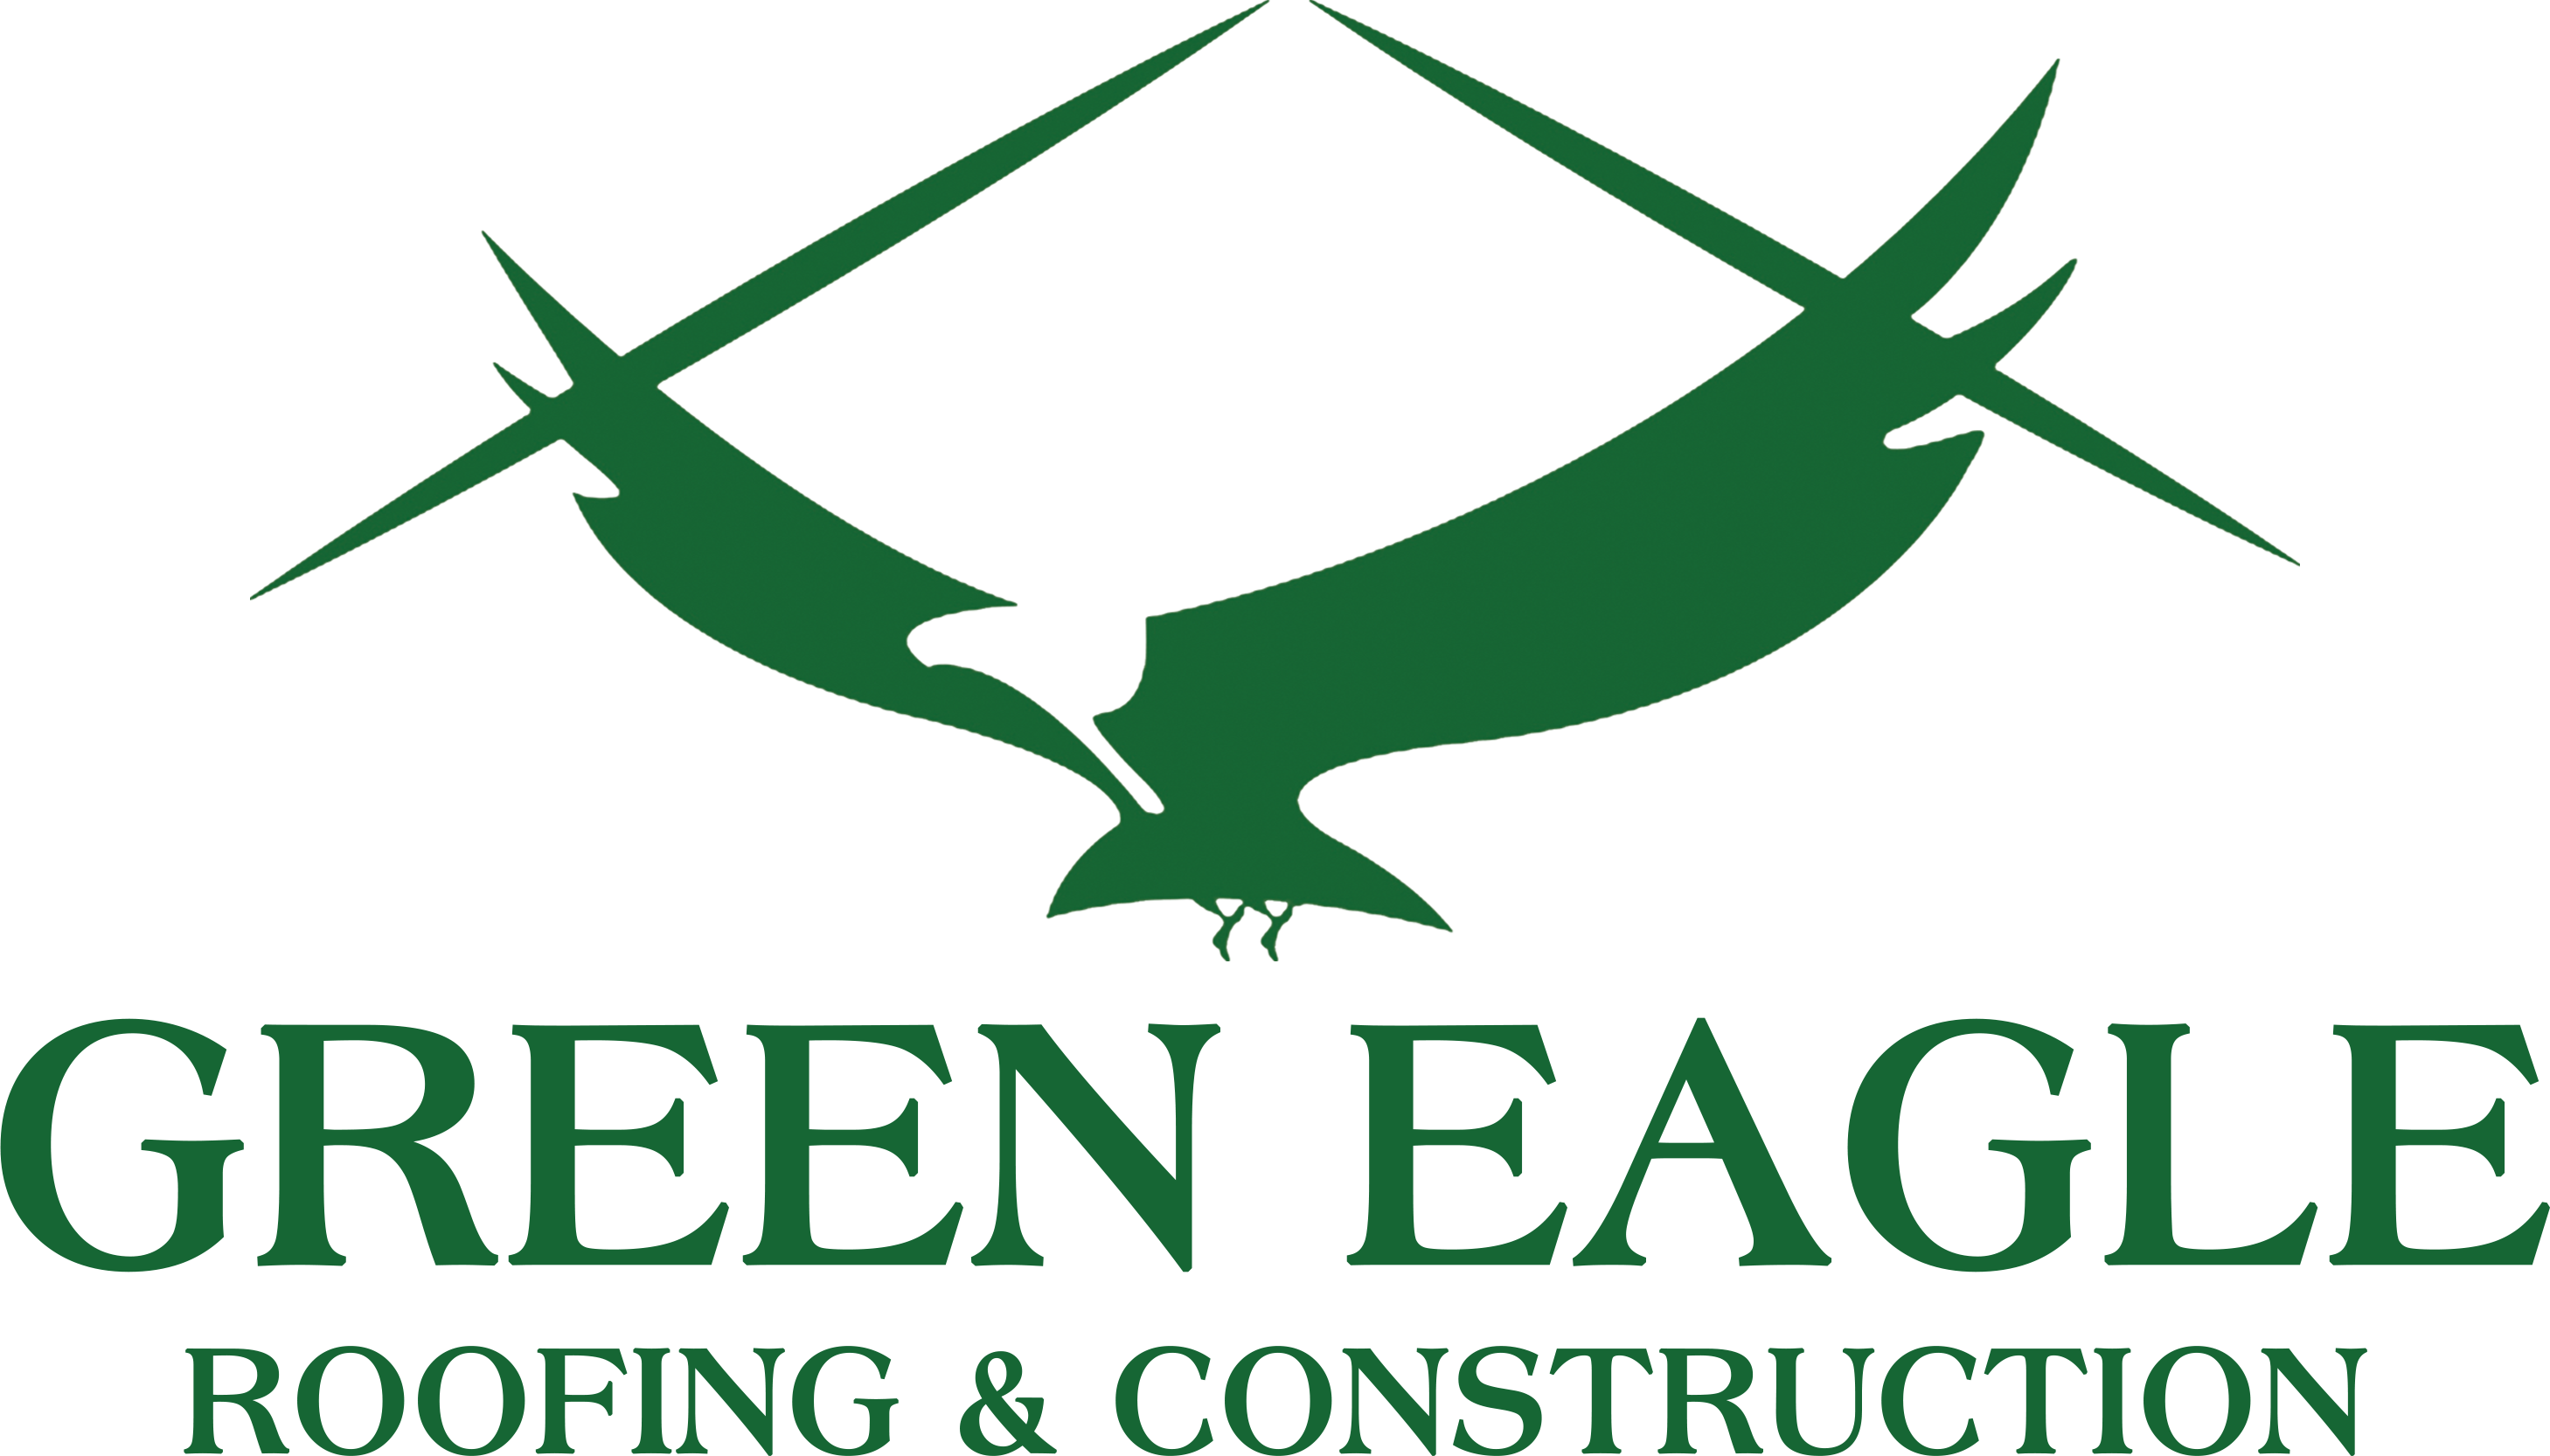 Green Eagle Roofing & Construction 